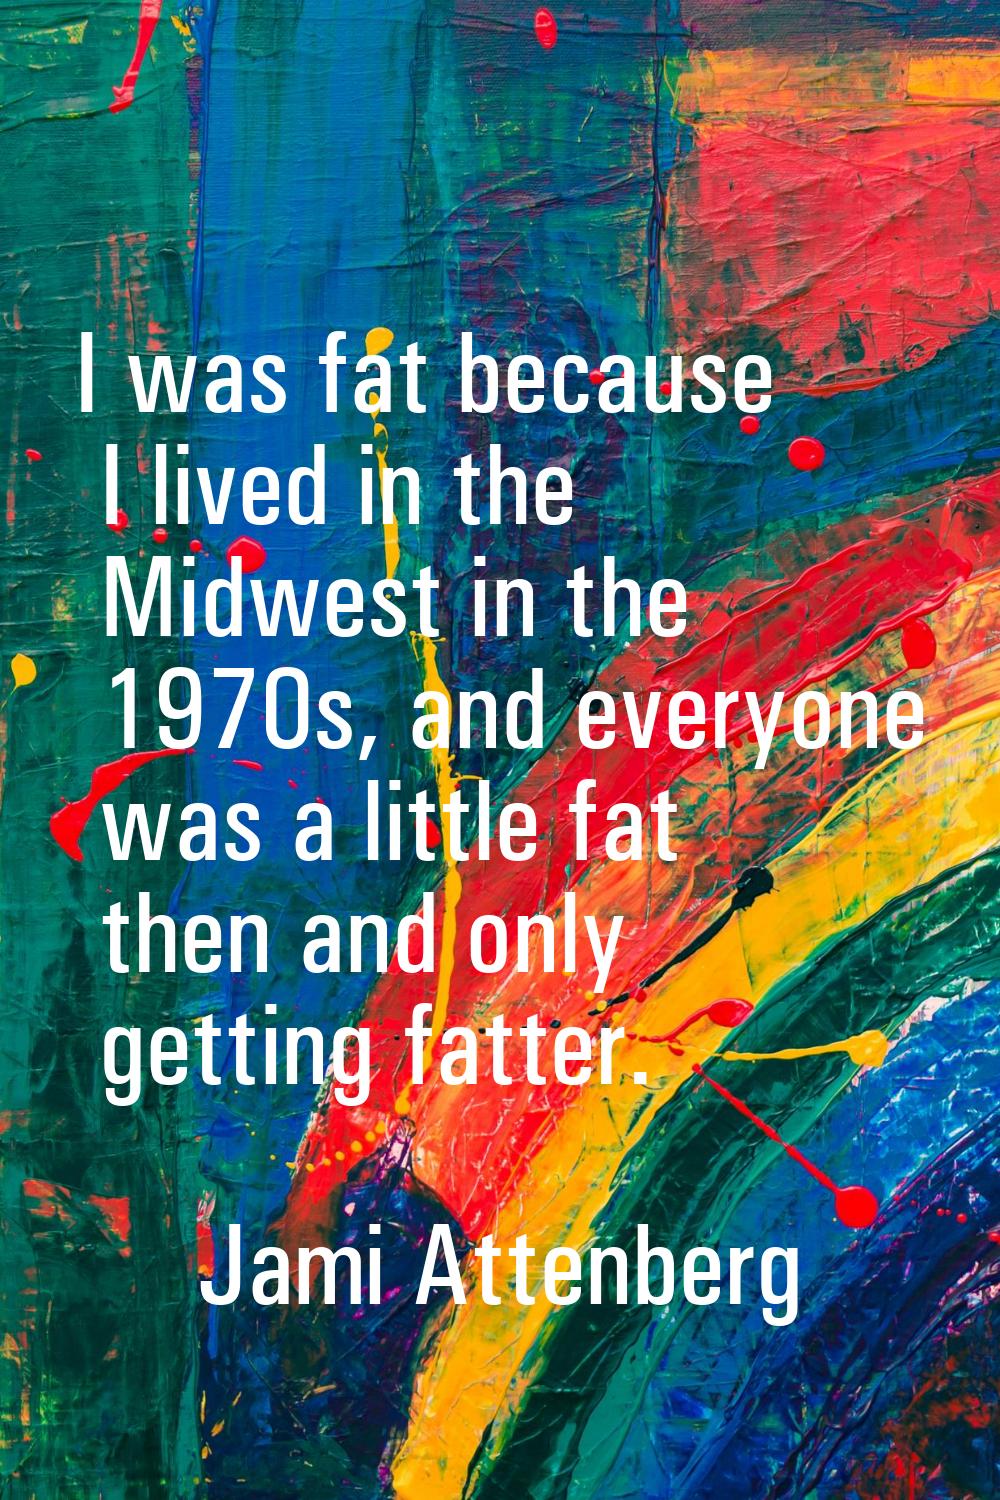 I was fat because I lived in the Midwest in the 1970s, and everyone was a little fat then and only 